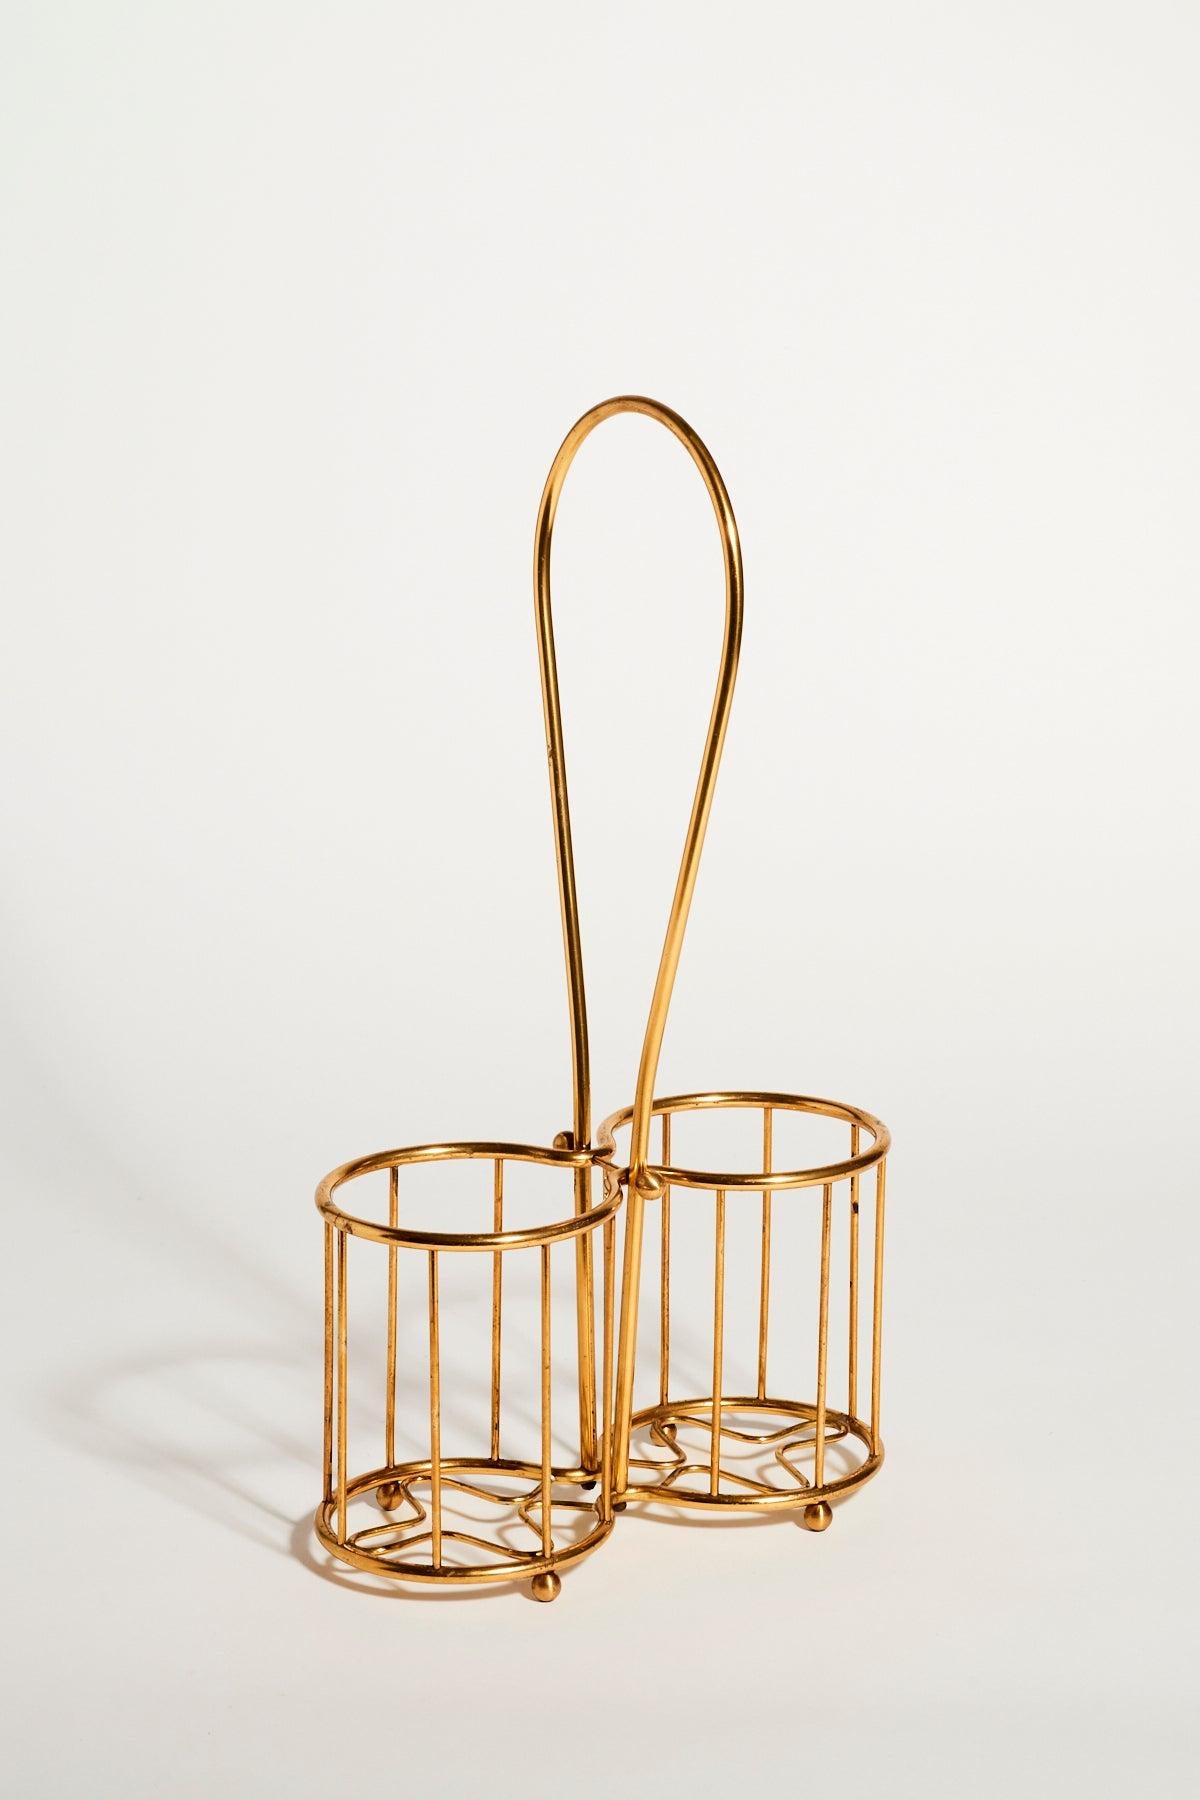 1970s brass twin bottle holder in a basket style with ball feet and a looped handle.